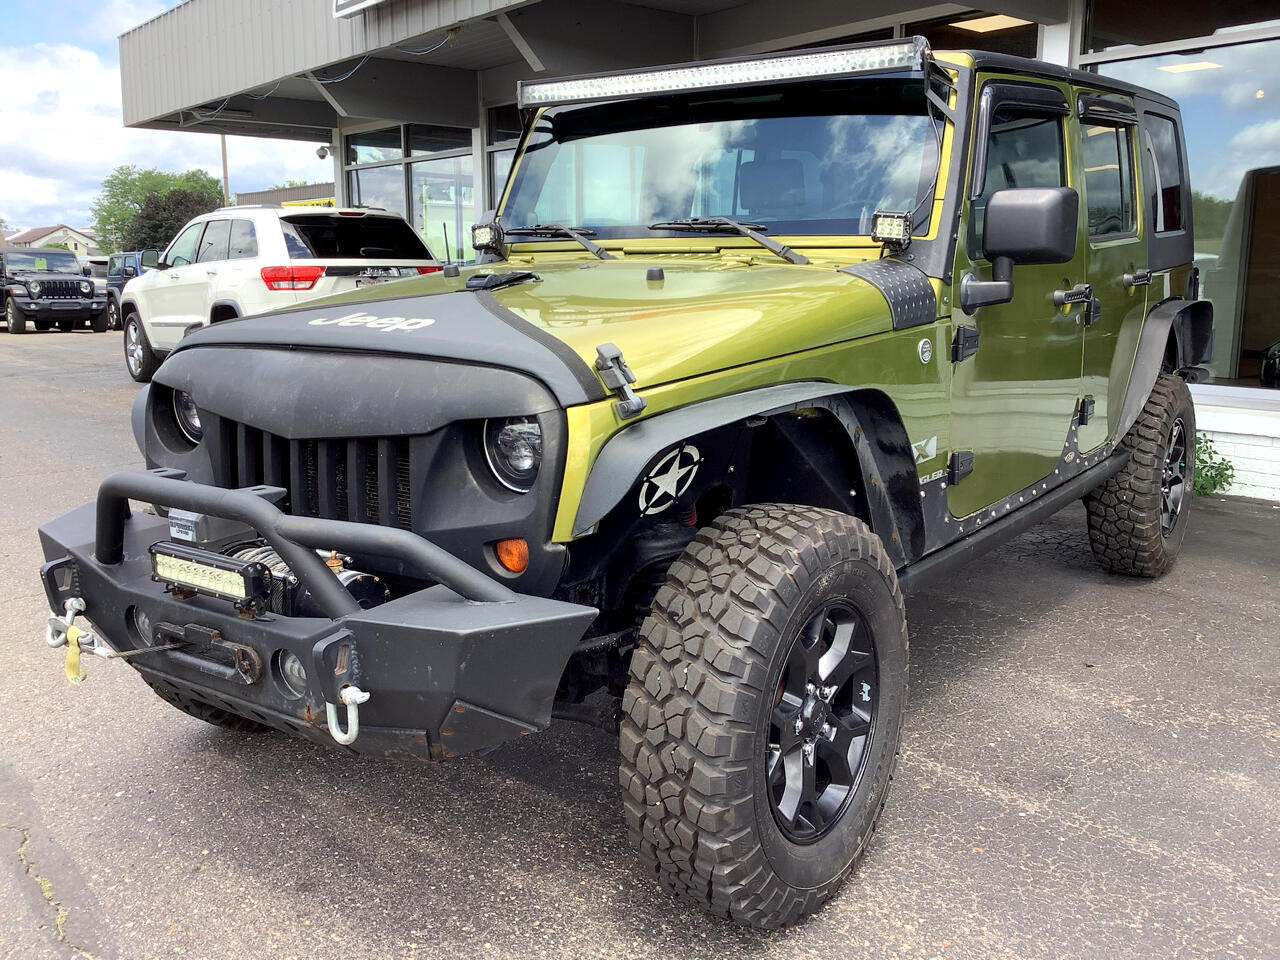 Used 2007 Jeep Wrangler Unlimited X 4WD for Sale in Portage WI 53901 MSI  Portage LLC